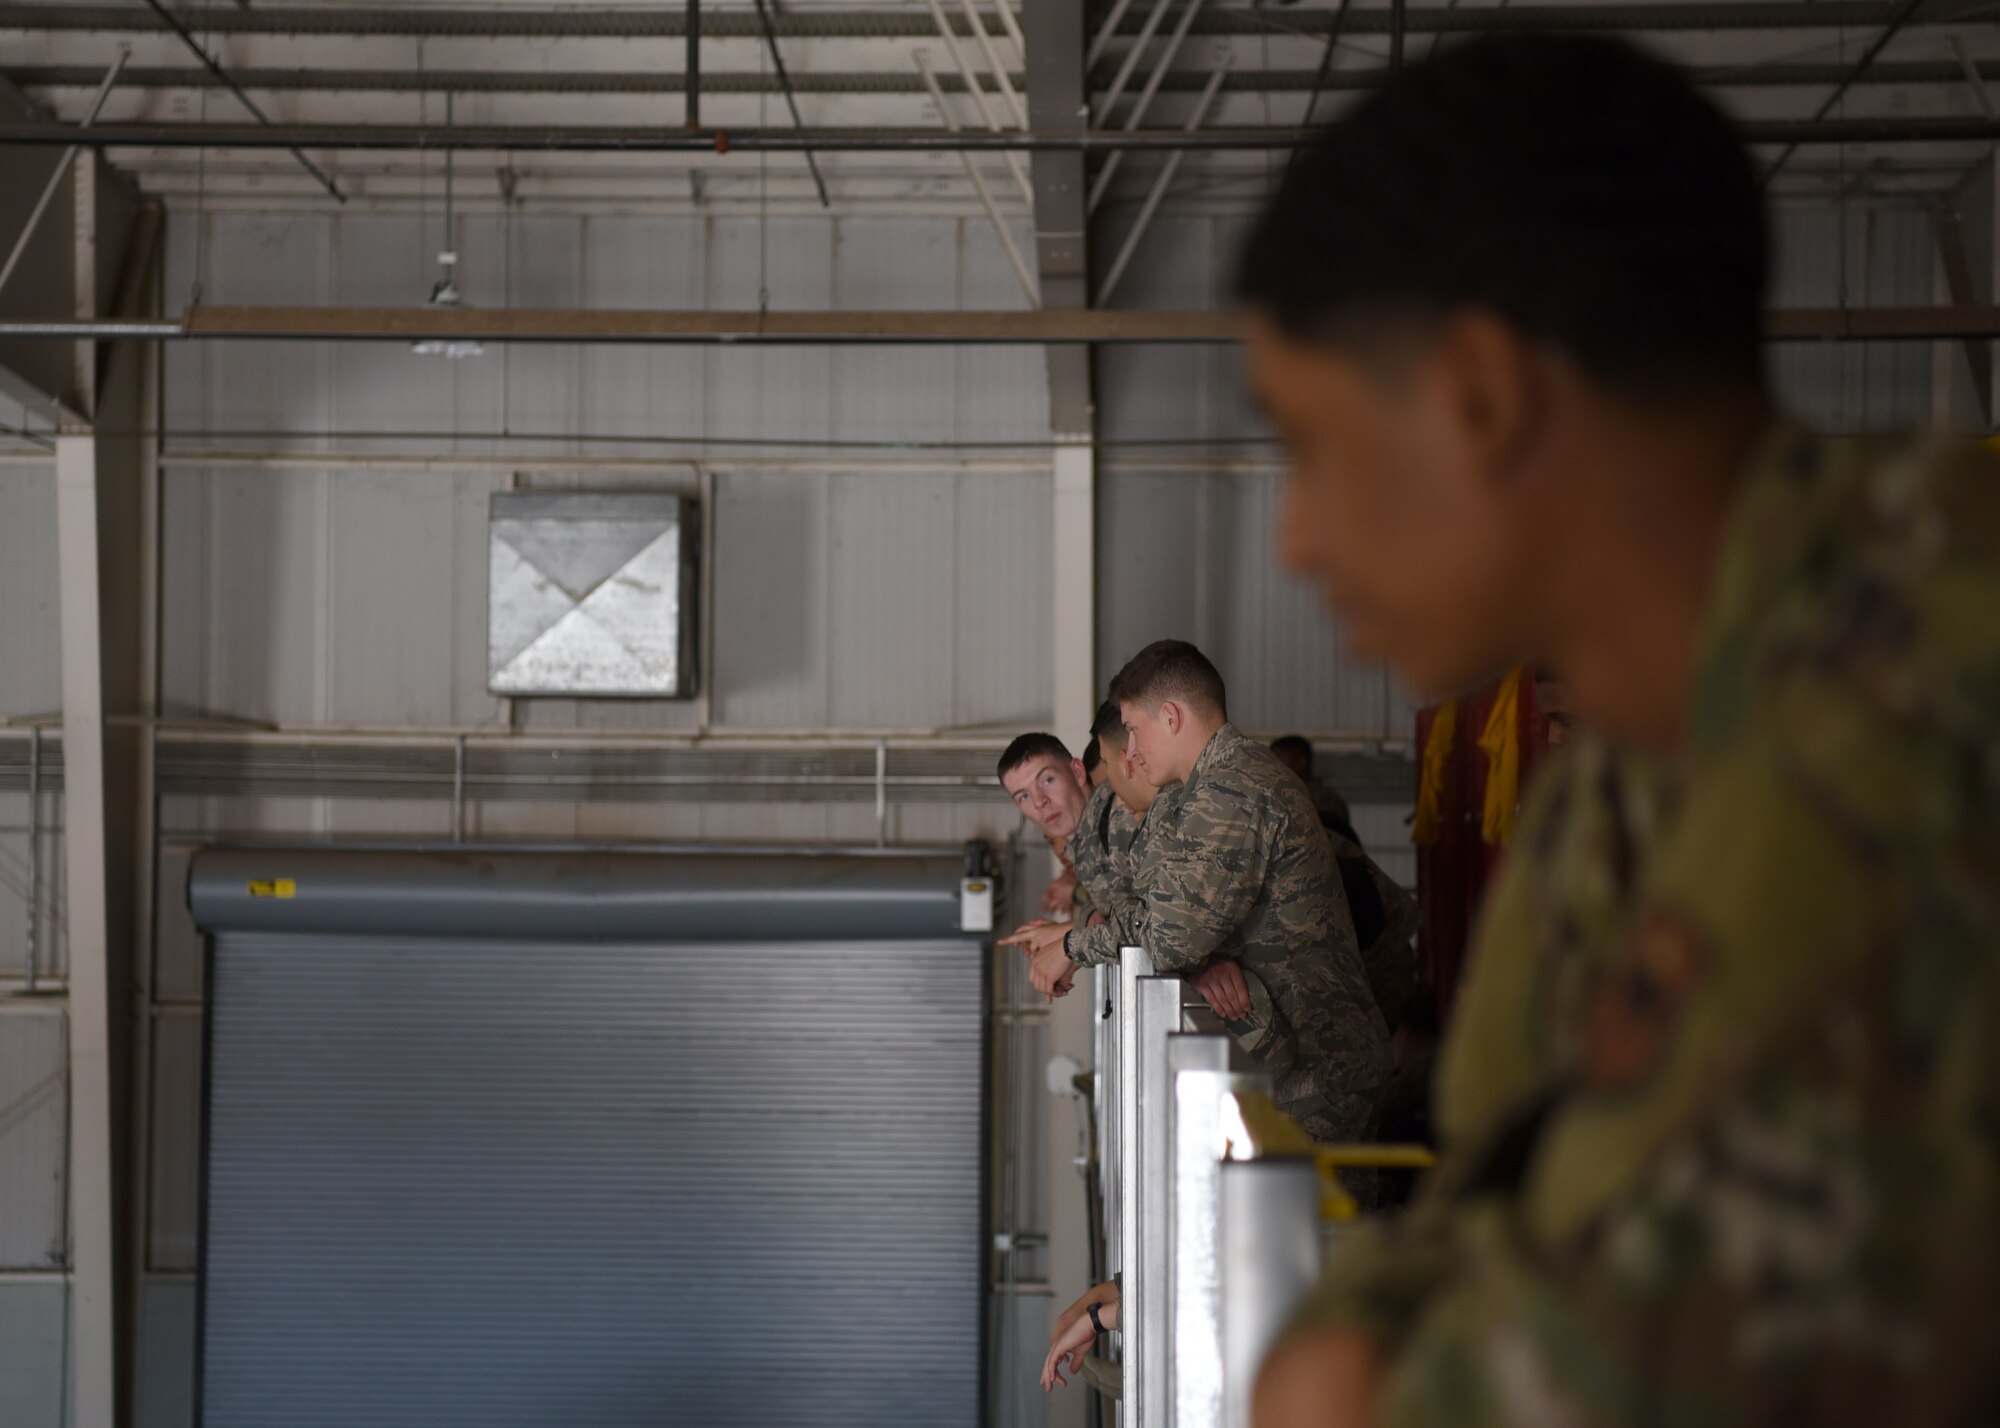 U.S. Air Force students from the 17th Training Wing claim their spot to view the 17th Training Group Drill Competition inside the Louis F. Garland Department of Defense Fire Academy High Bay on Goodfellow Air Force Base, Texas, Feb. 7, 2020. The elevated platform provides a bird’s eye view of the competition. (U.S. Air Force photo by Airman 1st Class Abbey Rieves)